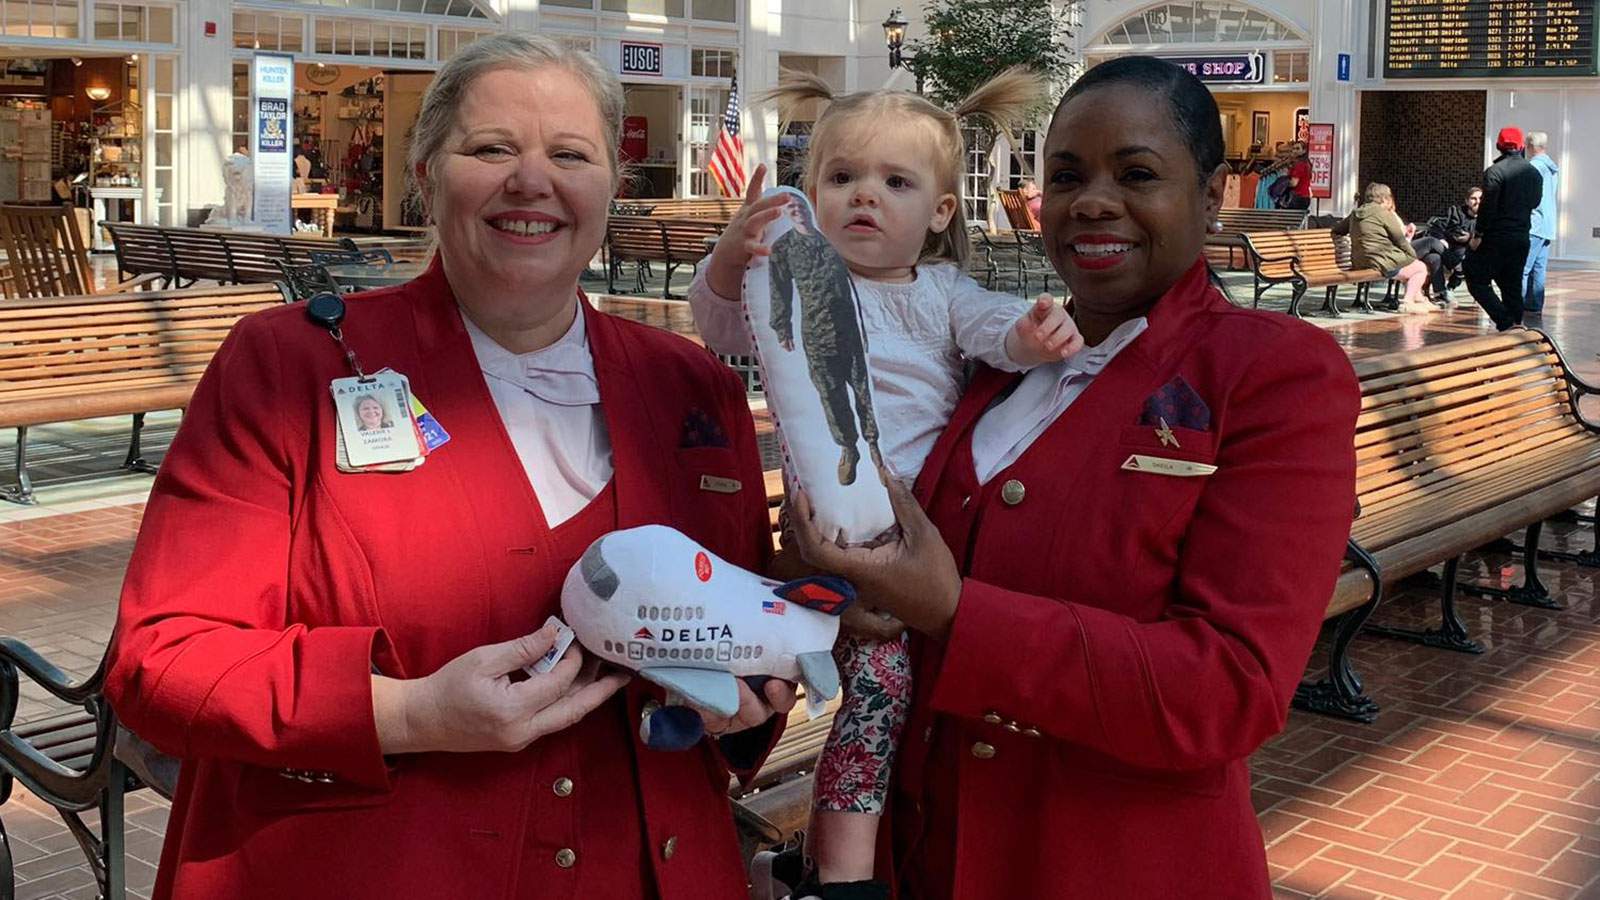 Delta reunited this little girl with her doll after her mom’s plea on social media